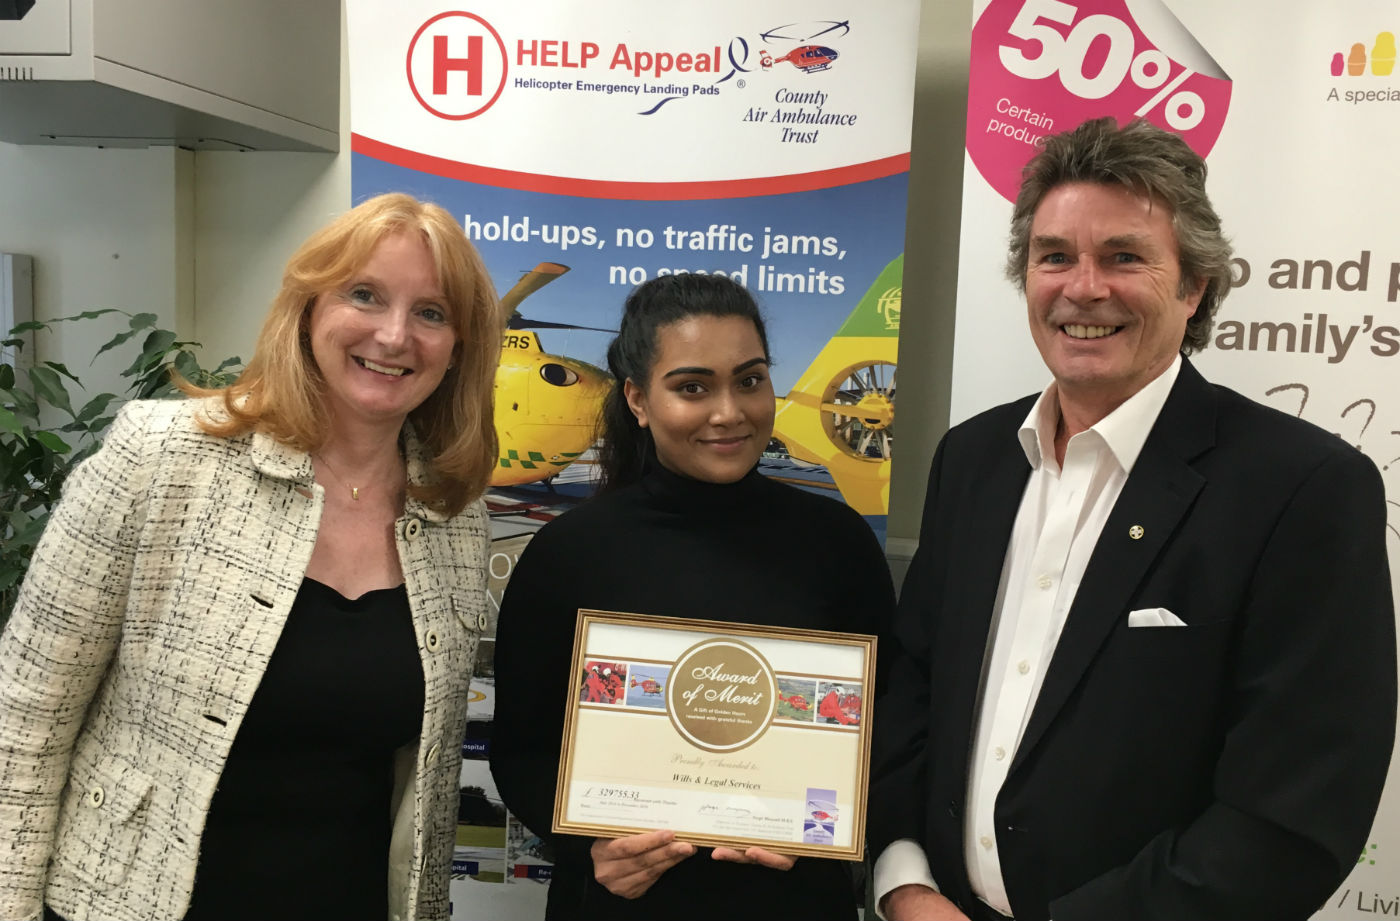 This latest donation takes the combined total donated, by Wills & Legal Services, to £350,000. From left: Sally Abbott, HELP Appeal head of fundraising; Mahima Sultana, trainee charity liaison officer at Wills & Legal Services; and Robert Bertram, CEO HELP Appeal. HELP Appeal Photo